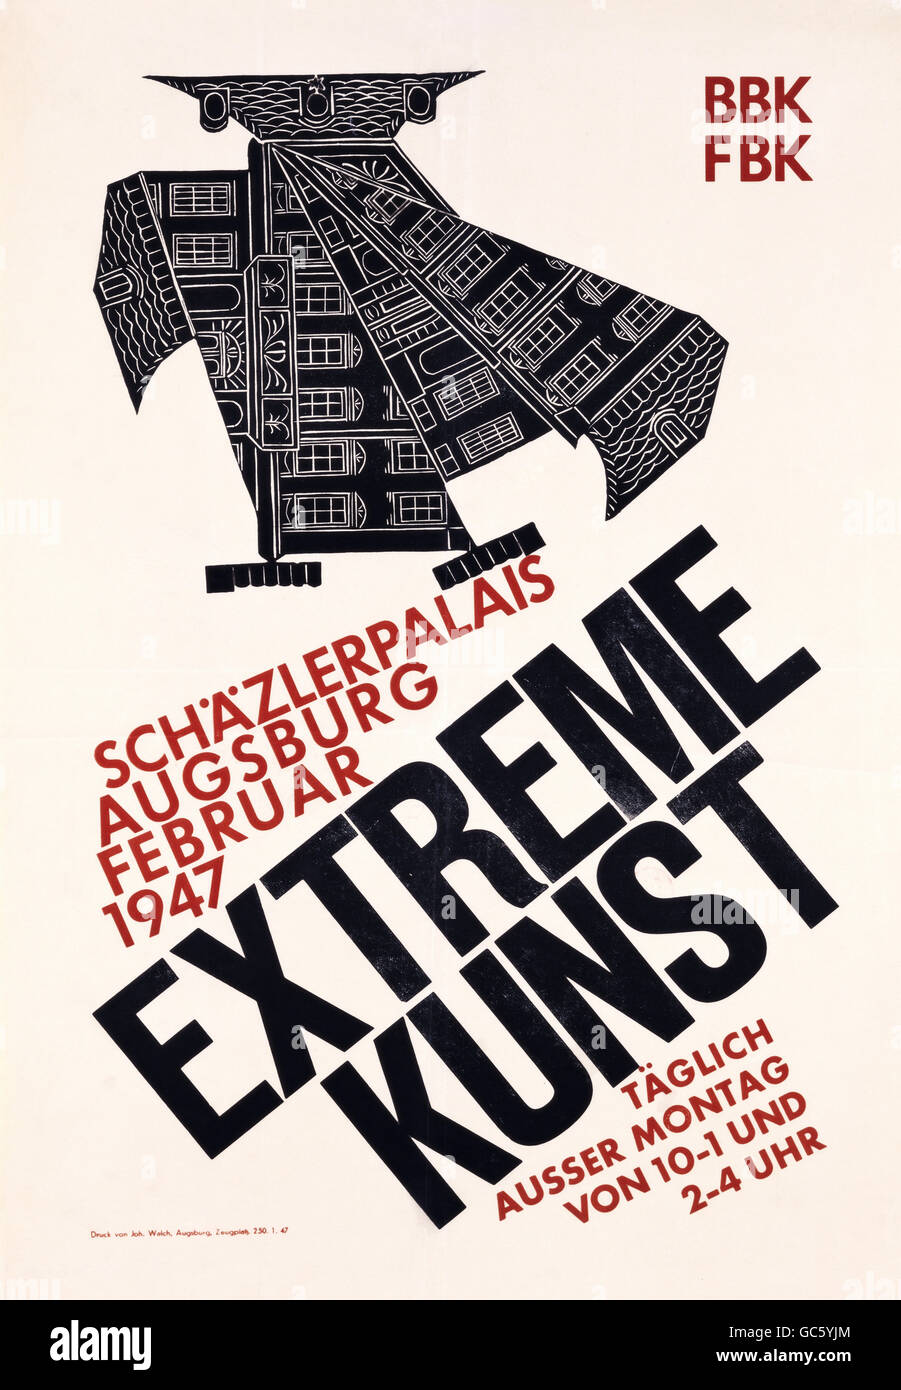 exhibitions, fine arts, exhibition 'Extreme Kunst' (Extreme Art), Augsburg, February 1947, poster, Additional-Rights-Clearences-Not Available Stock Photo